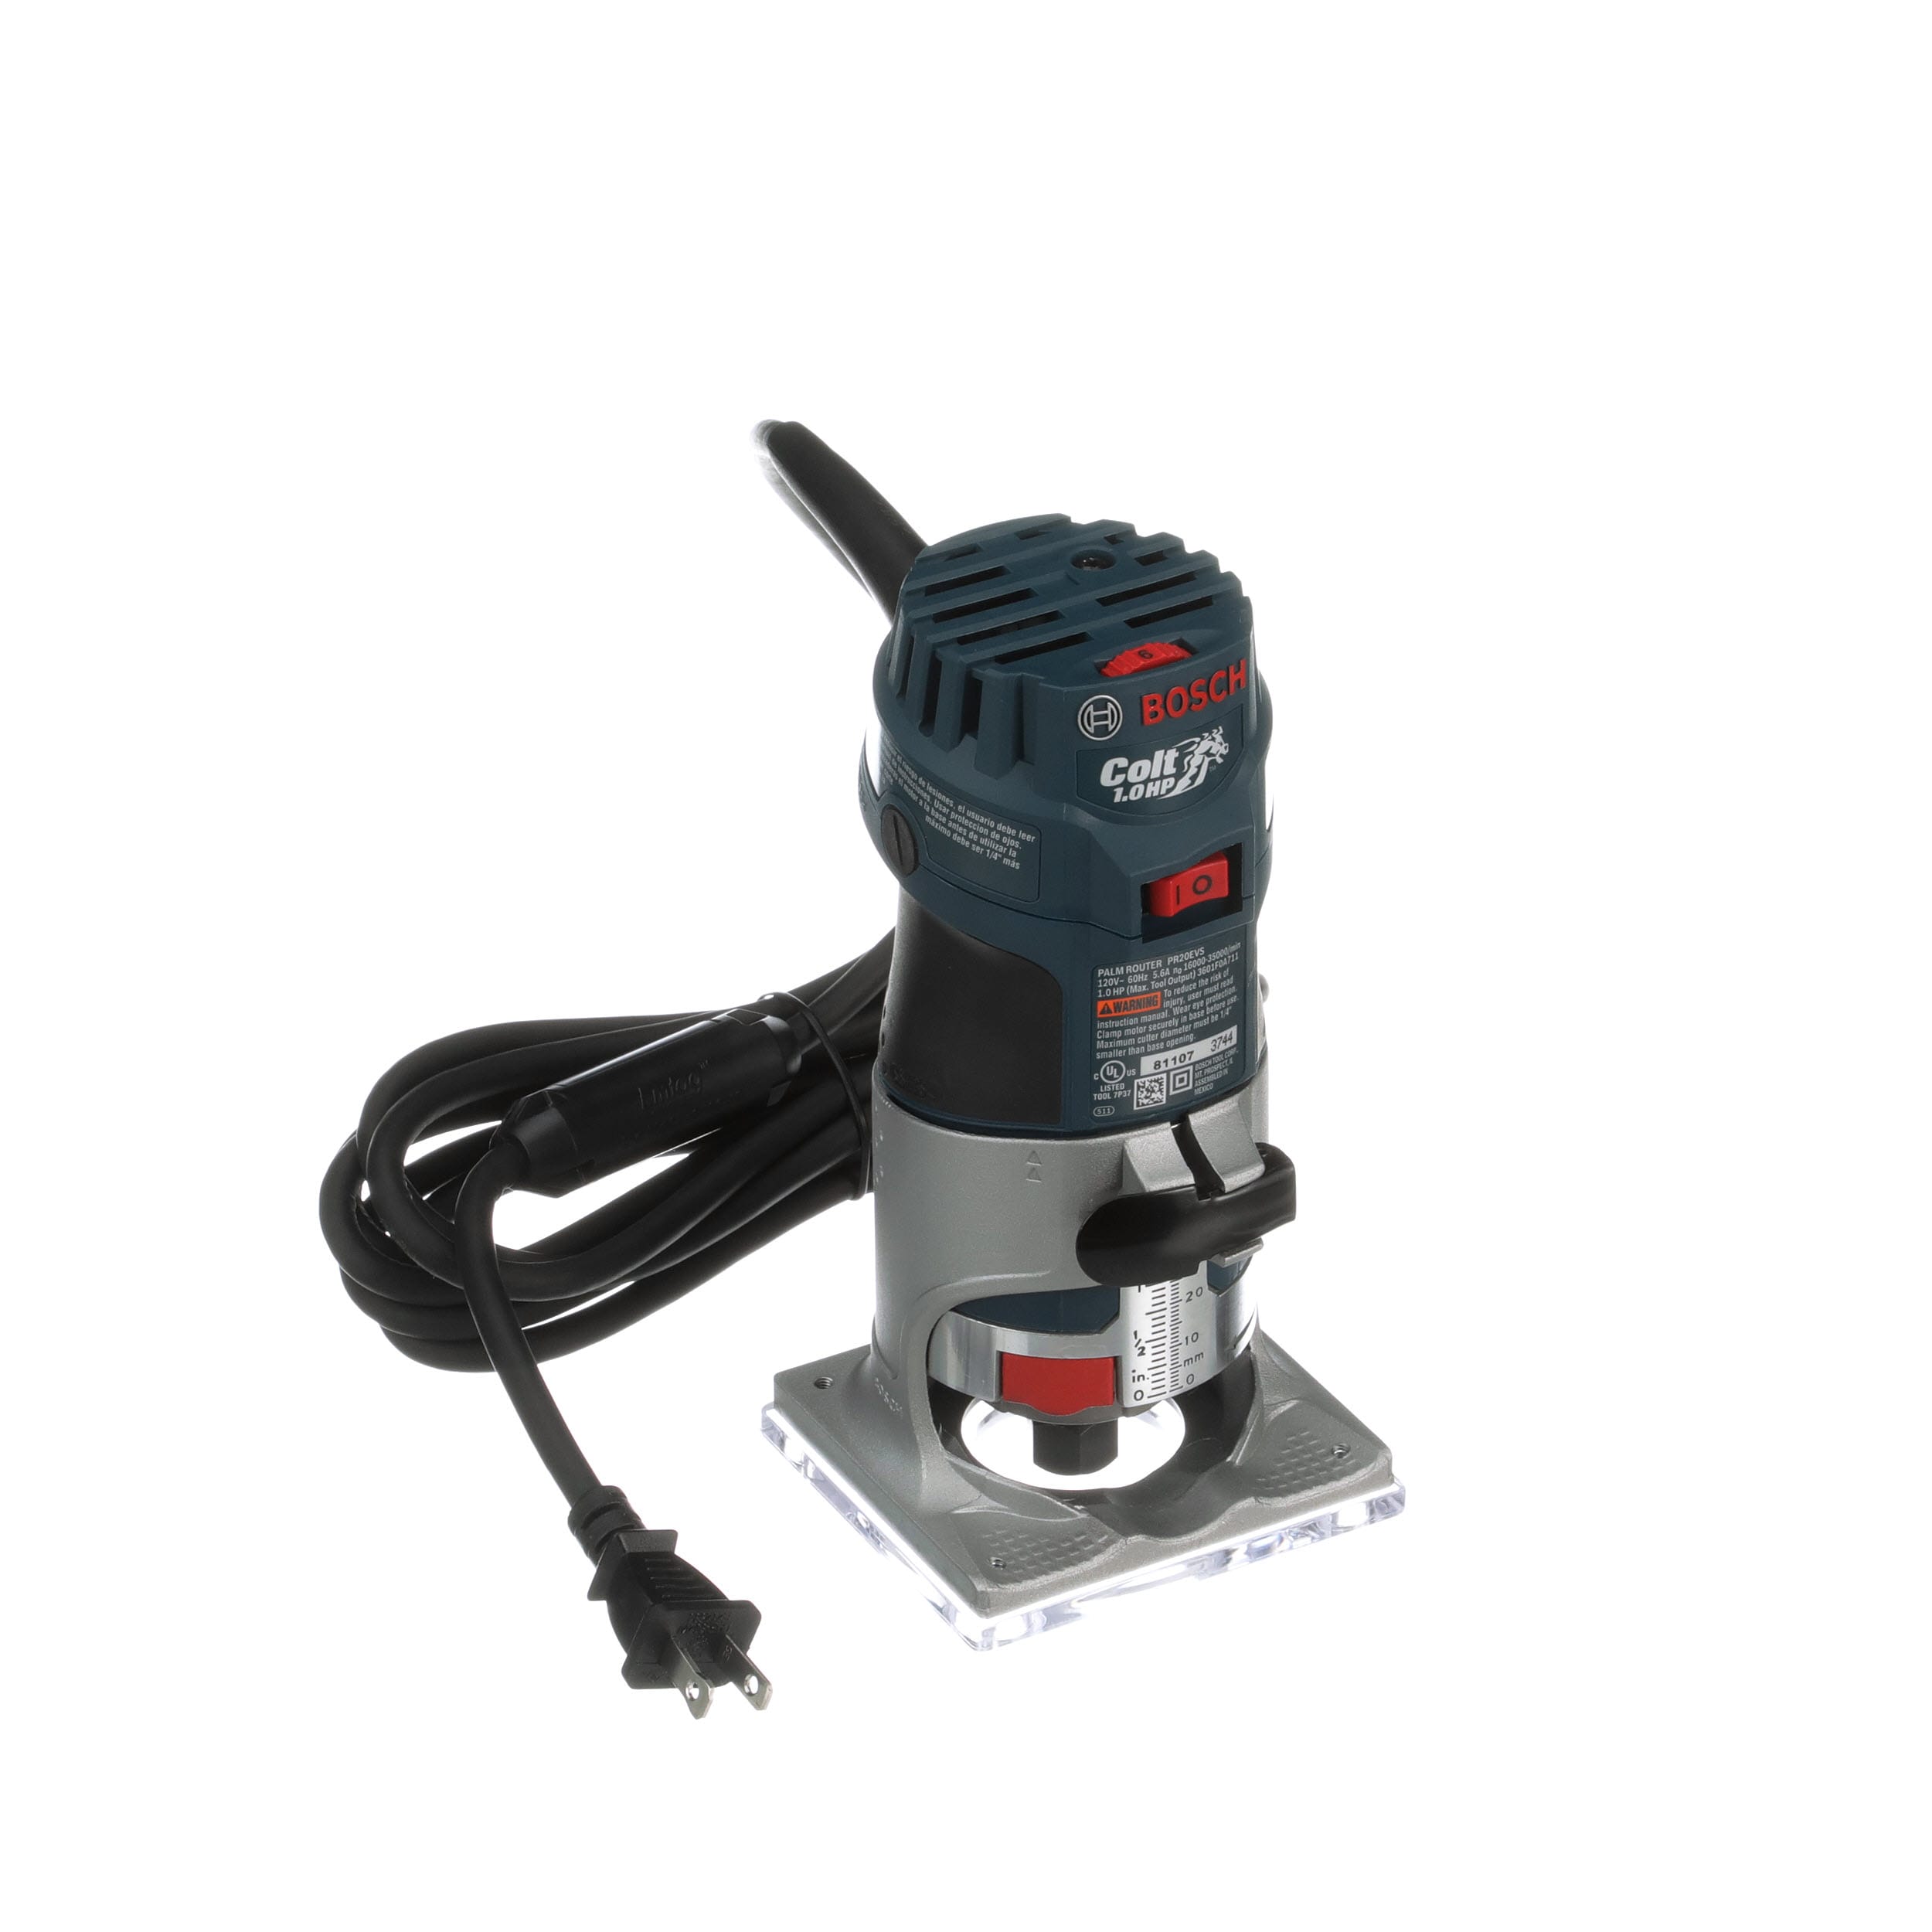 Bosch 1/4-in 1-HP Variable Speed Corded Router Only) at Lowes.com